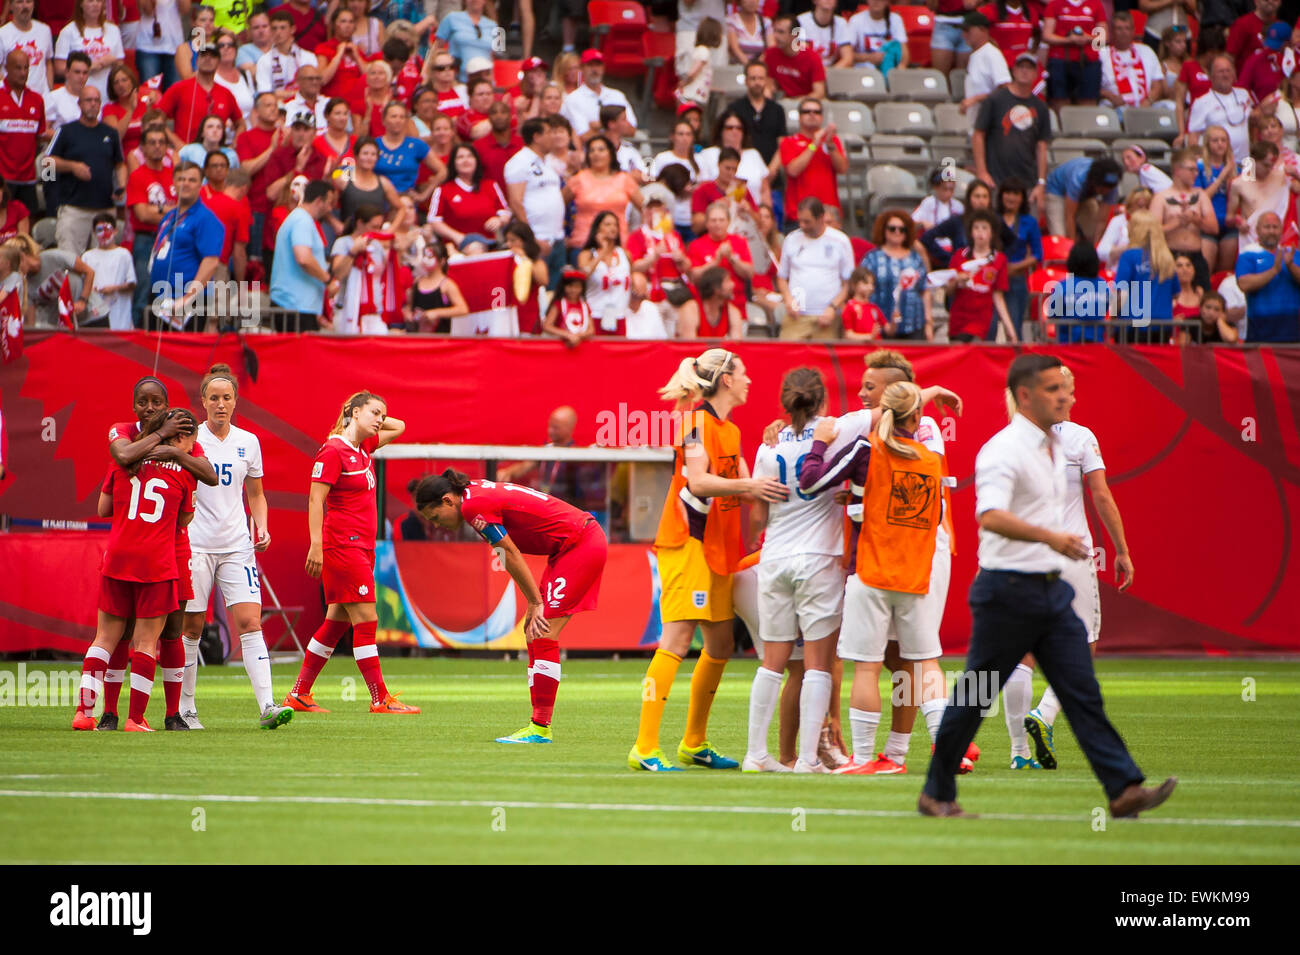 Vancouver, Canada. 27th June, 2015. England players celebrate and Canadian players react following the quarterfinal match between Canada and England at the FIFA Women's World Cup Canada 2015 at BC Place Stadium. England won the match 2-1. Credit:  Matt Jacques/Alamy Live News Stock Photo